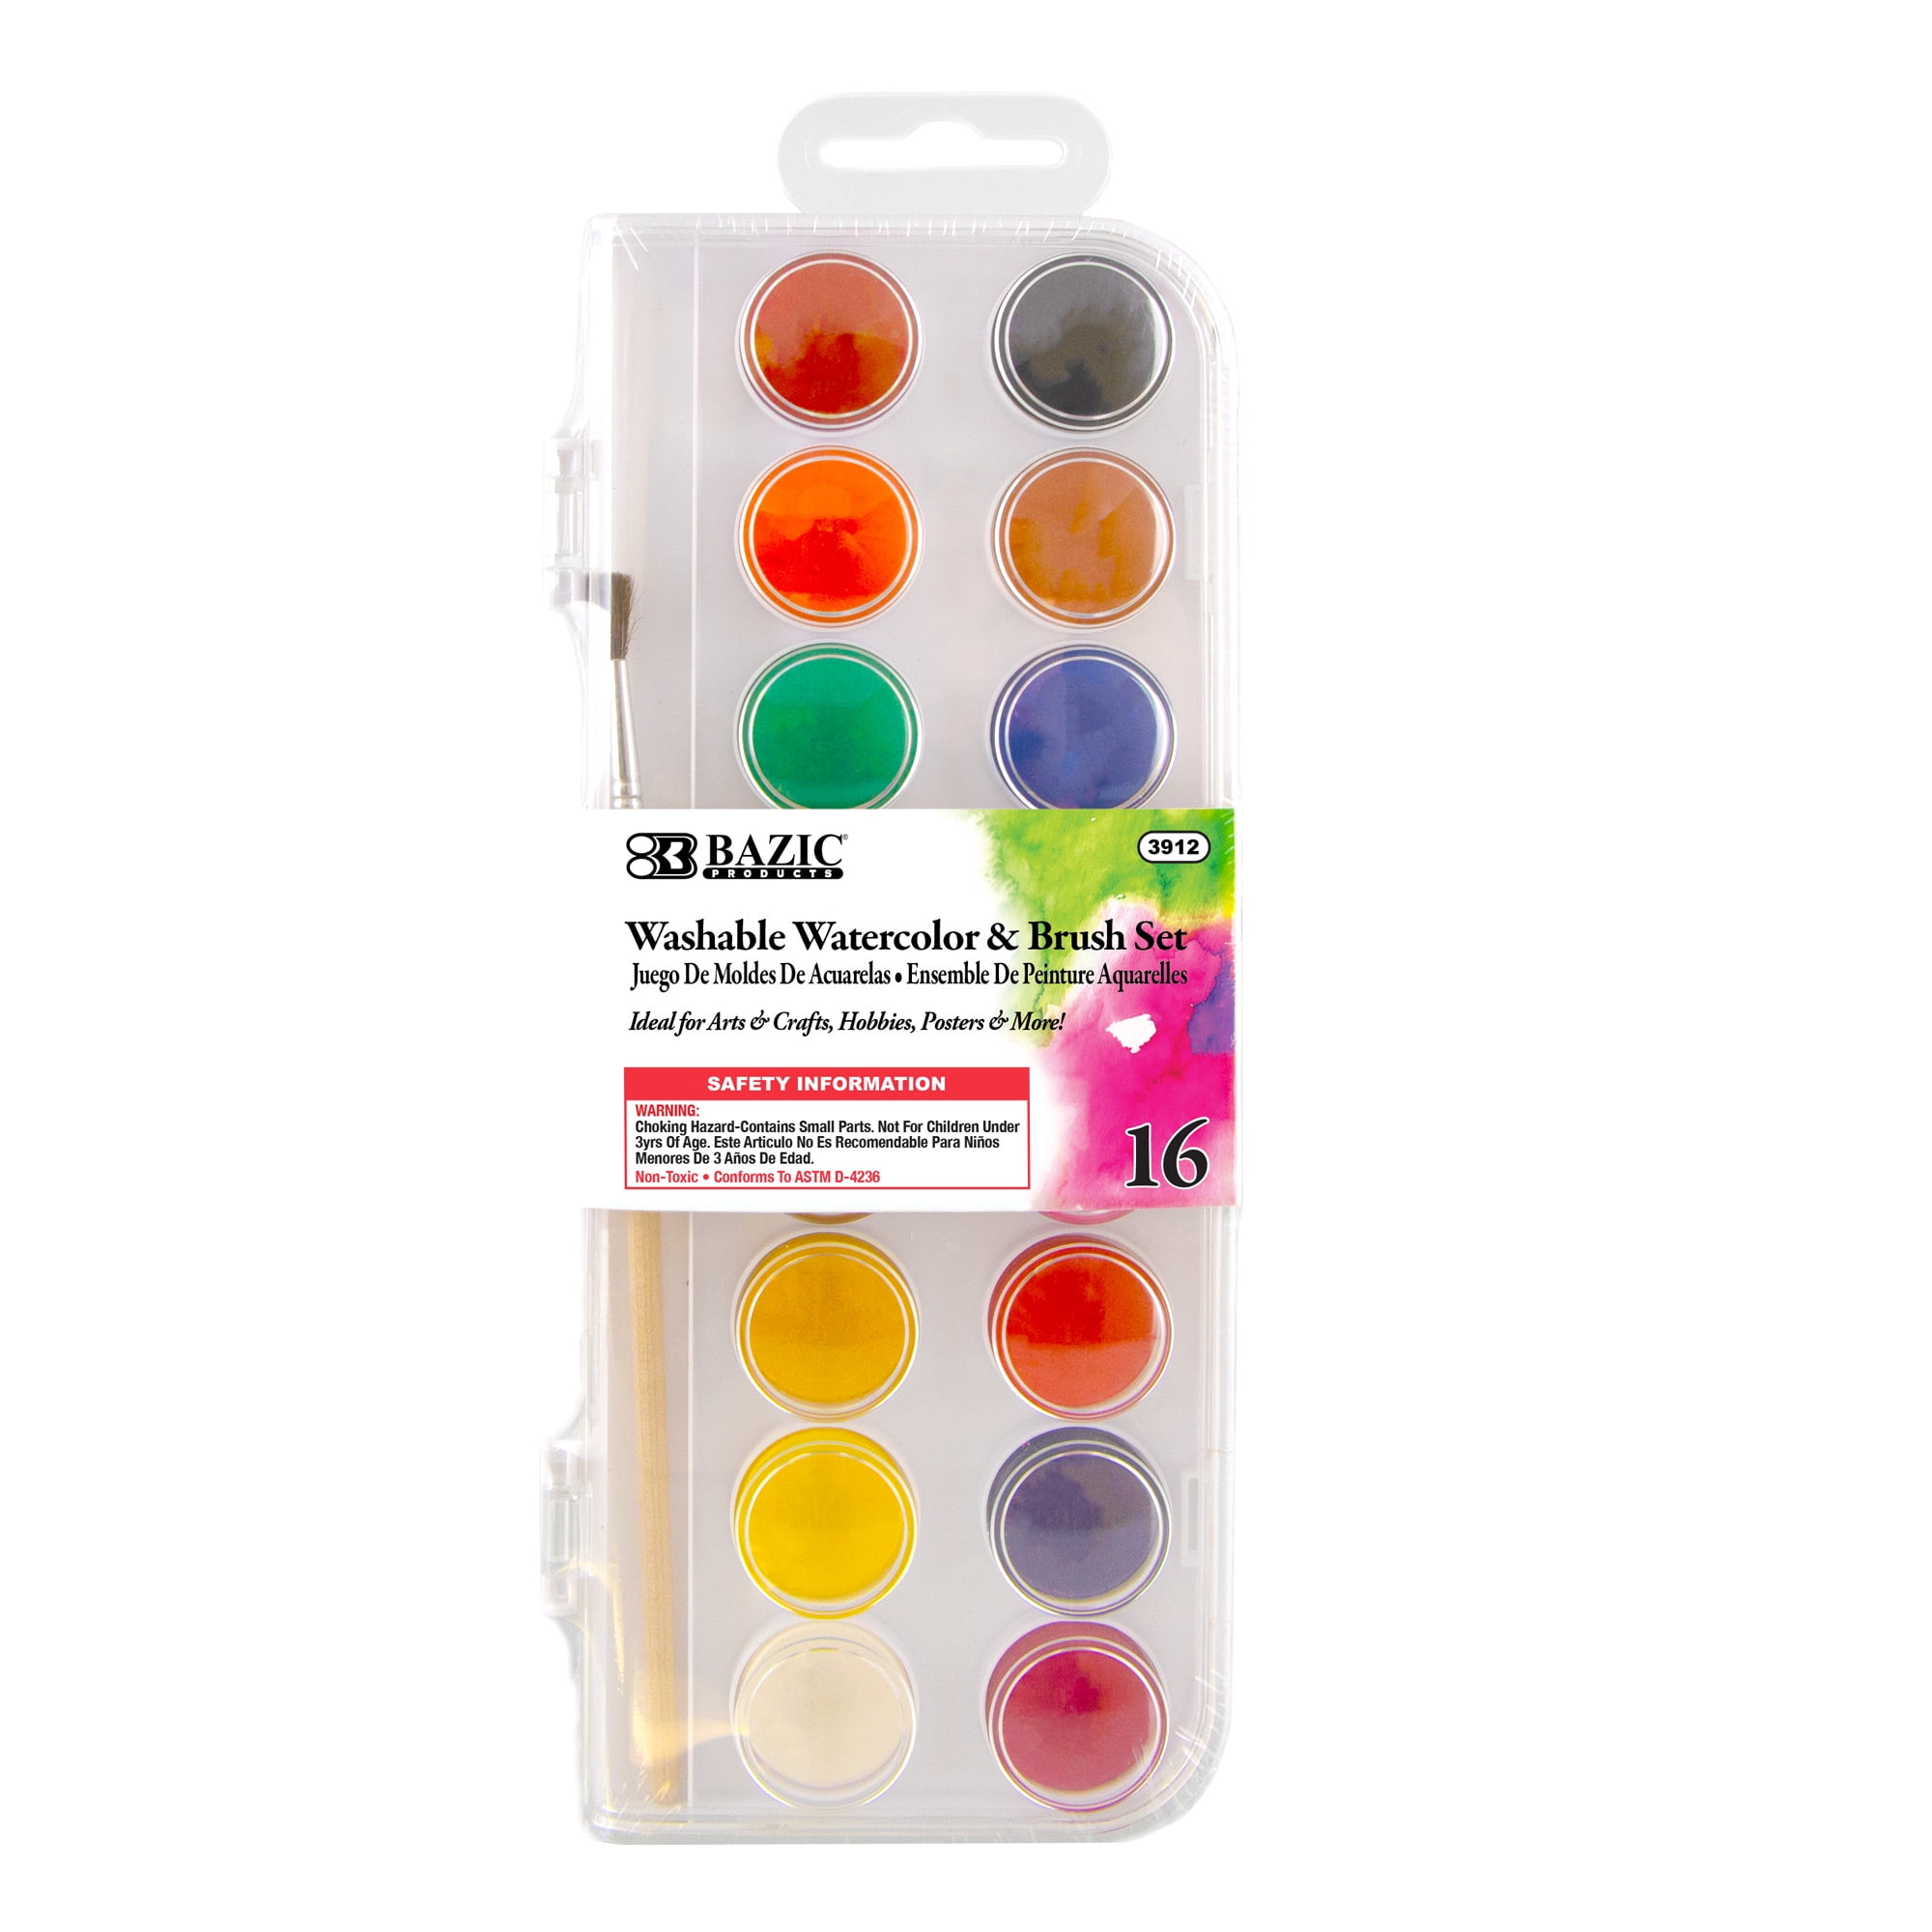 Picture of DDI 2354882 Washable Watercolor with Brush Set - 16 Pieces Case of 24